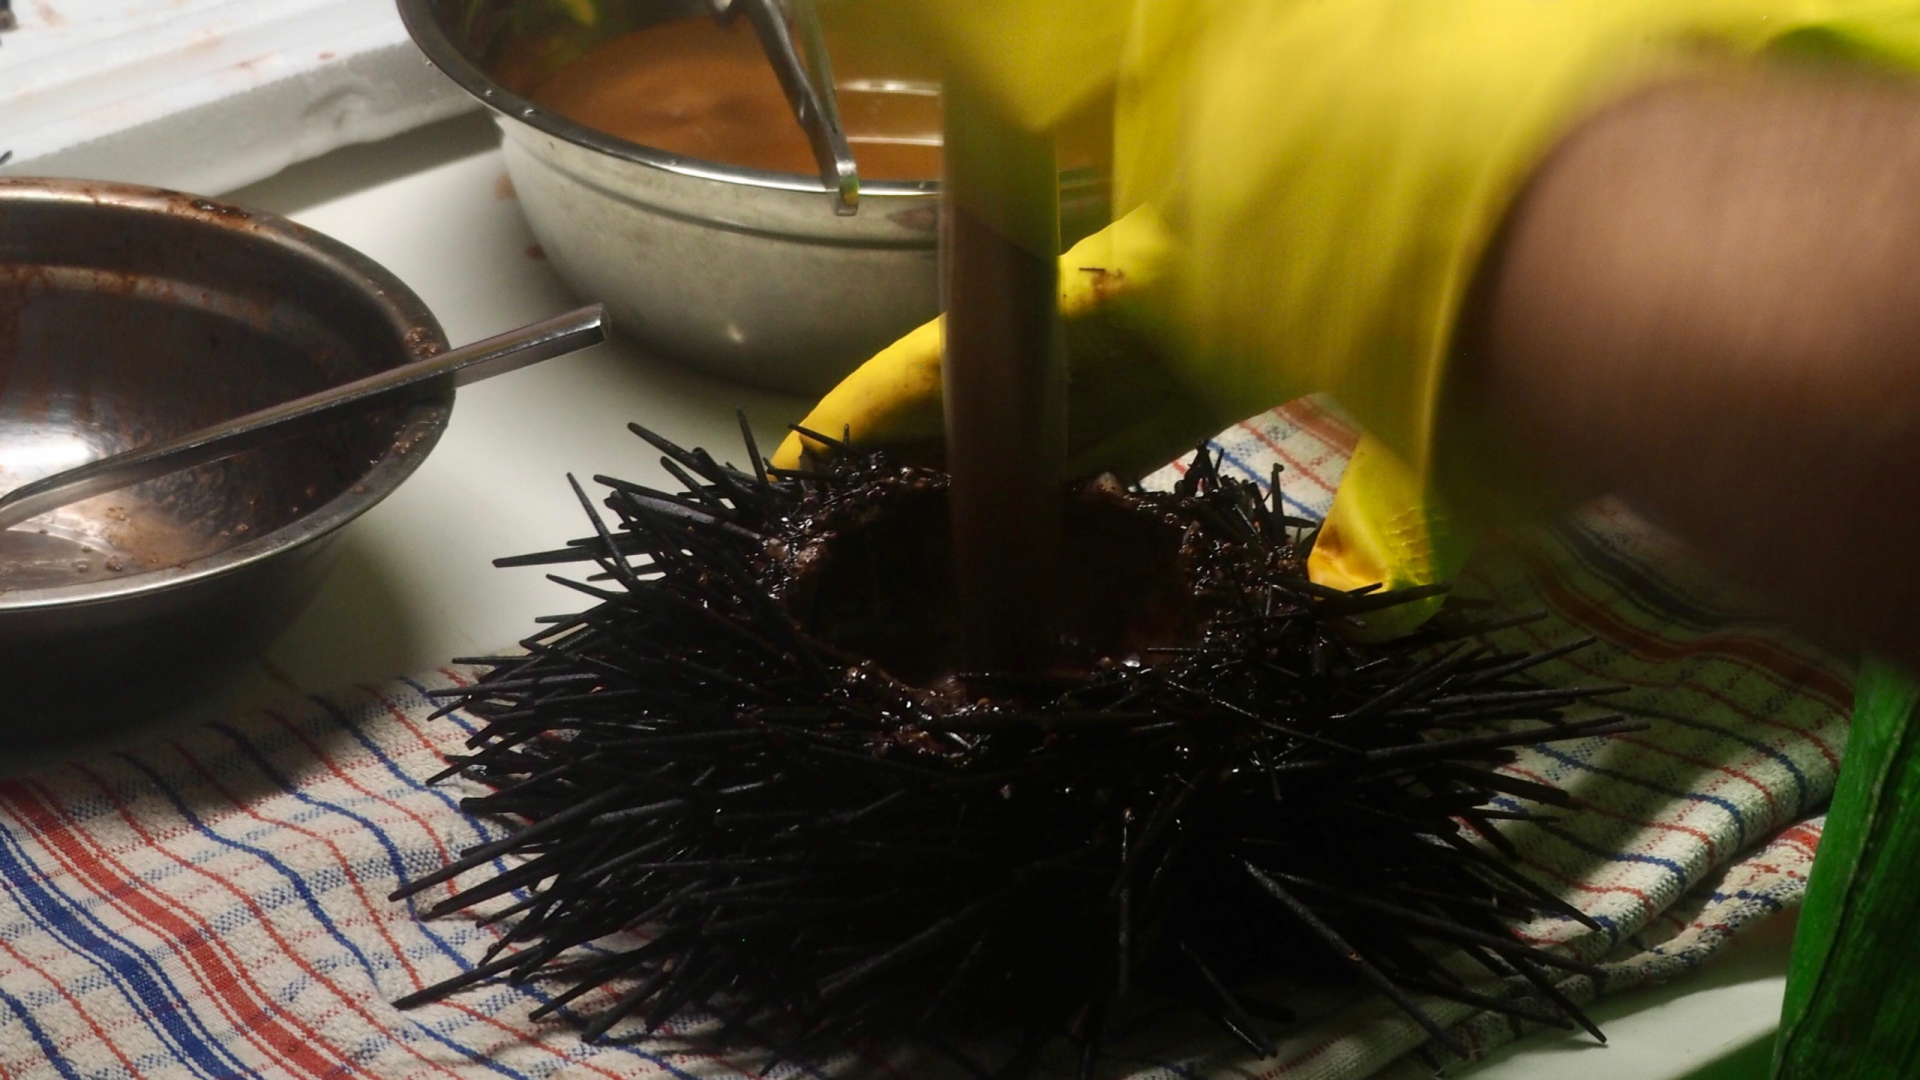 Hands wearing yellow rubber gloves breaking open a sea urchin and using a wooden stick to muddle the contents 